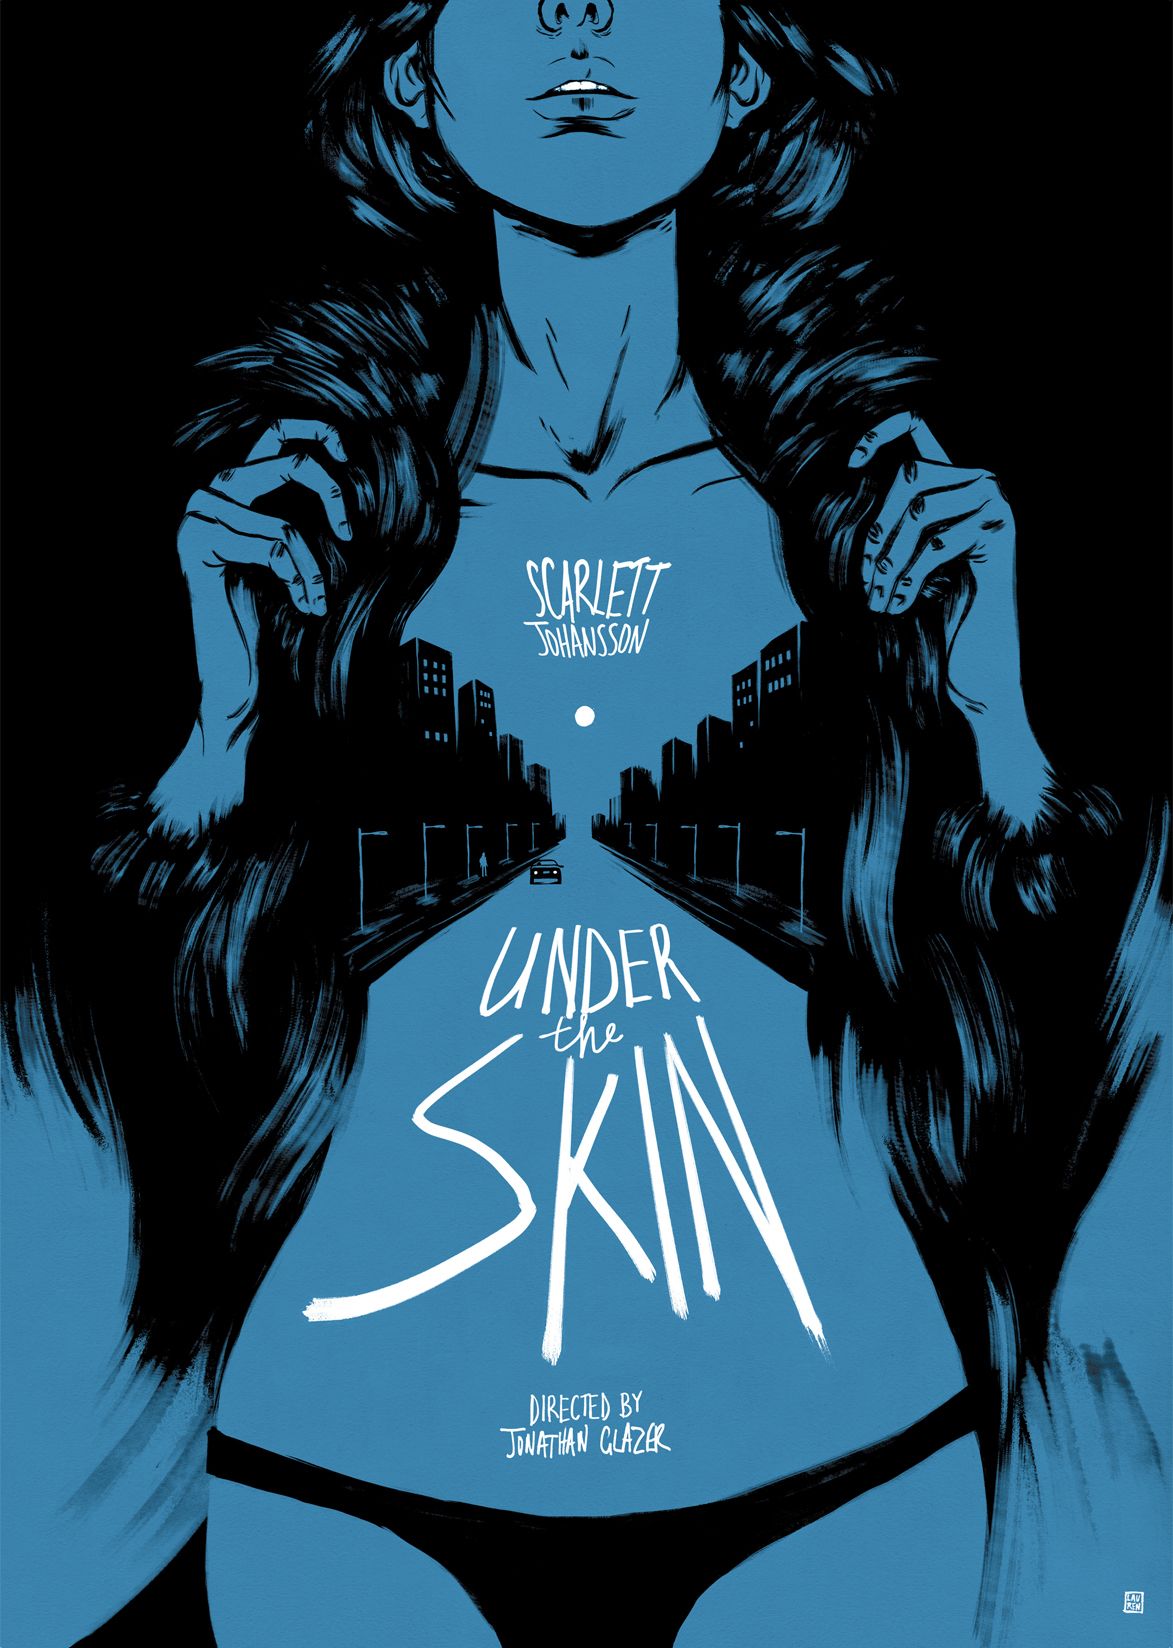 under the skin by michel faber